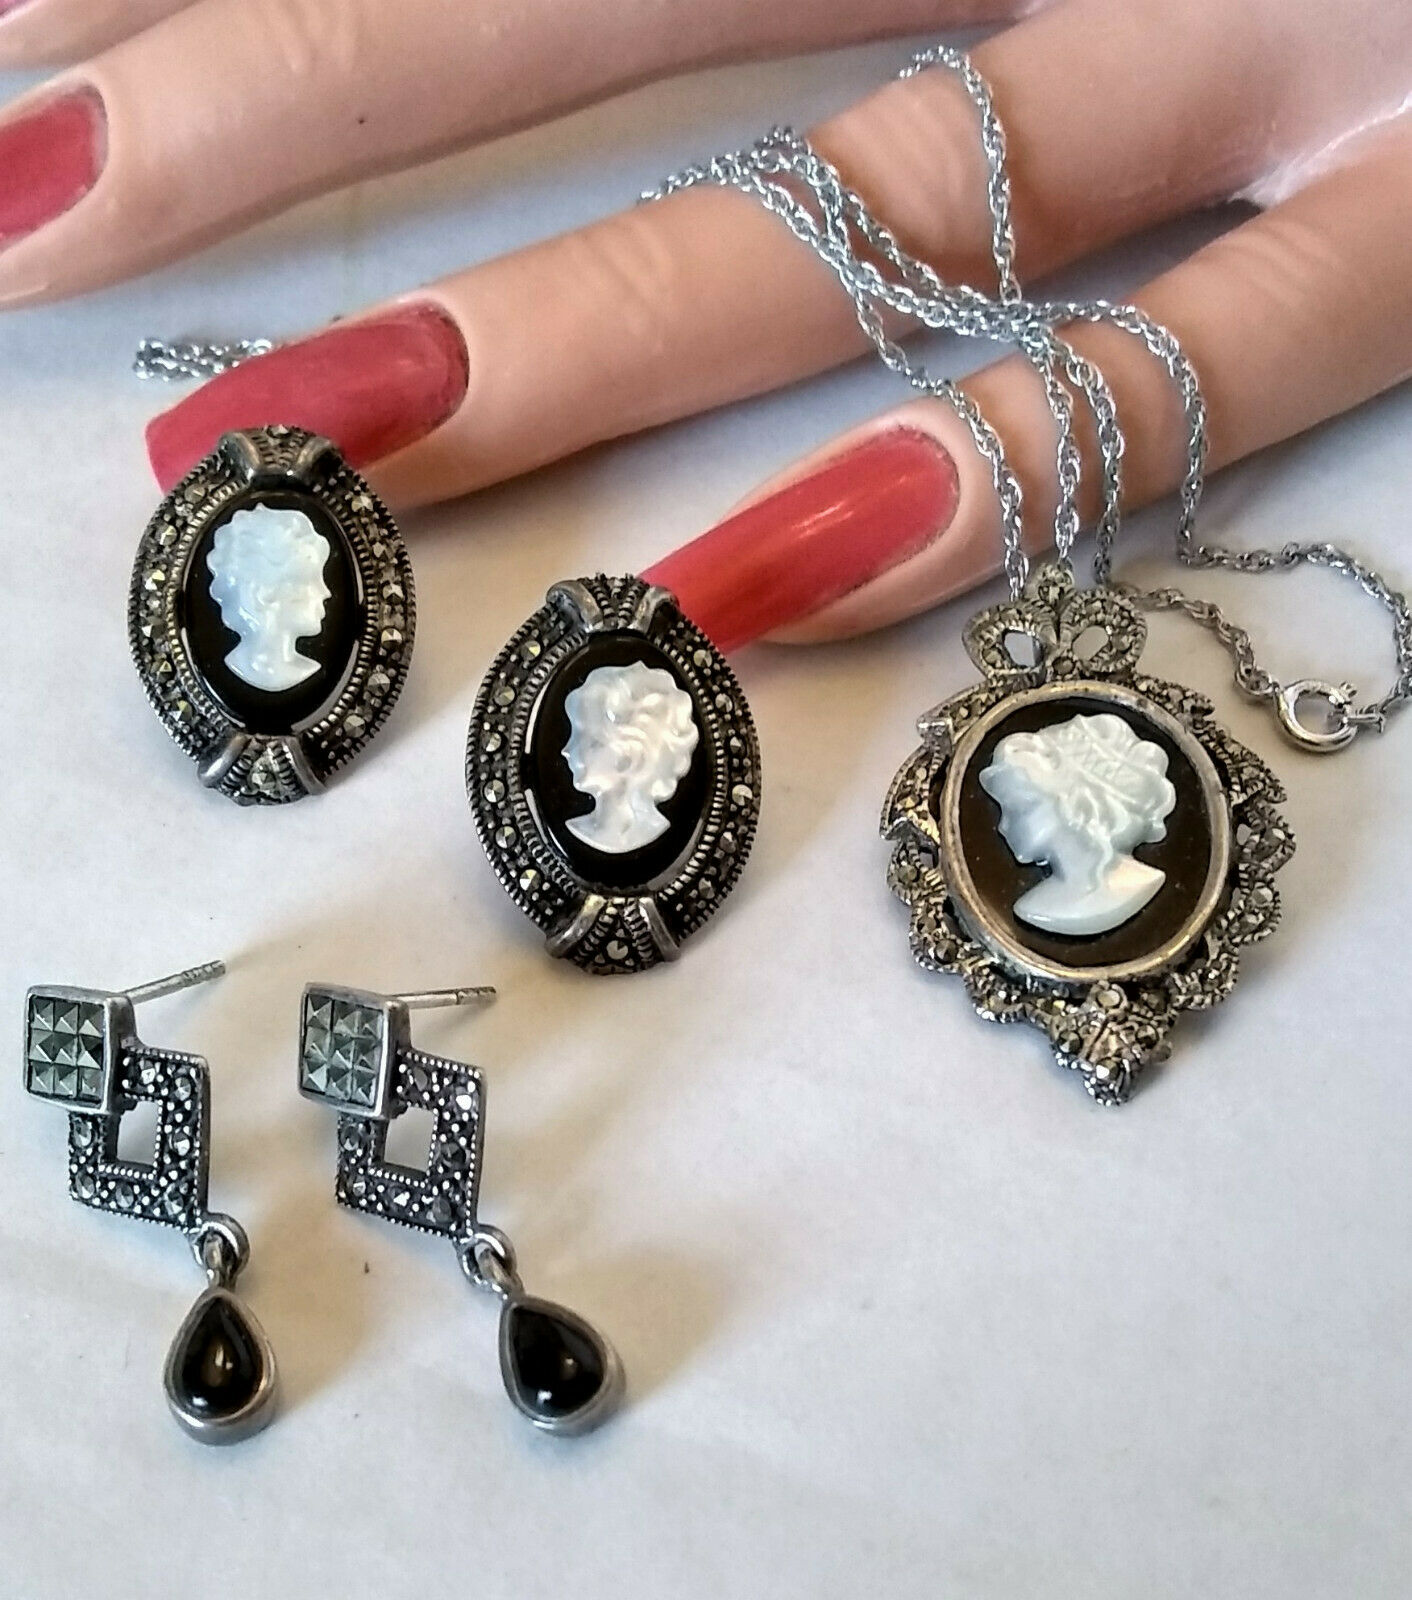 Sterling 925 Mop, Onyx, Marcasite Cameo Necklace Set W/ 2nd Pair Earrings, Vguc